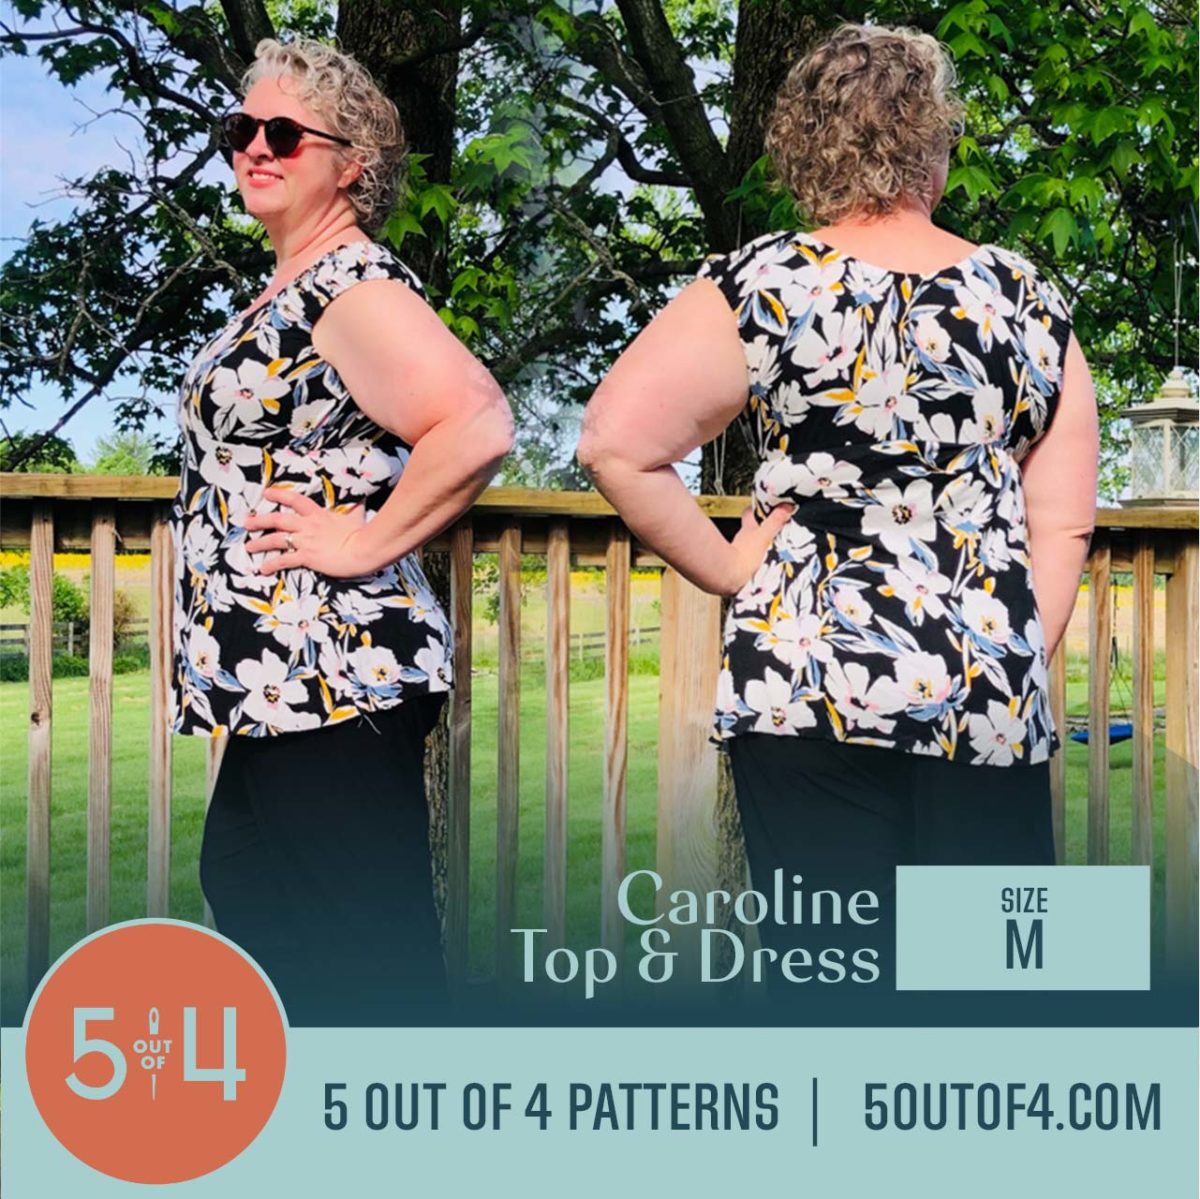 Caroline Top and Dress - 5 out of 4 Patterns